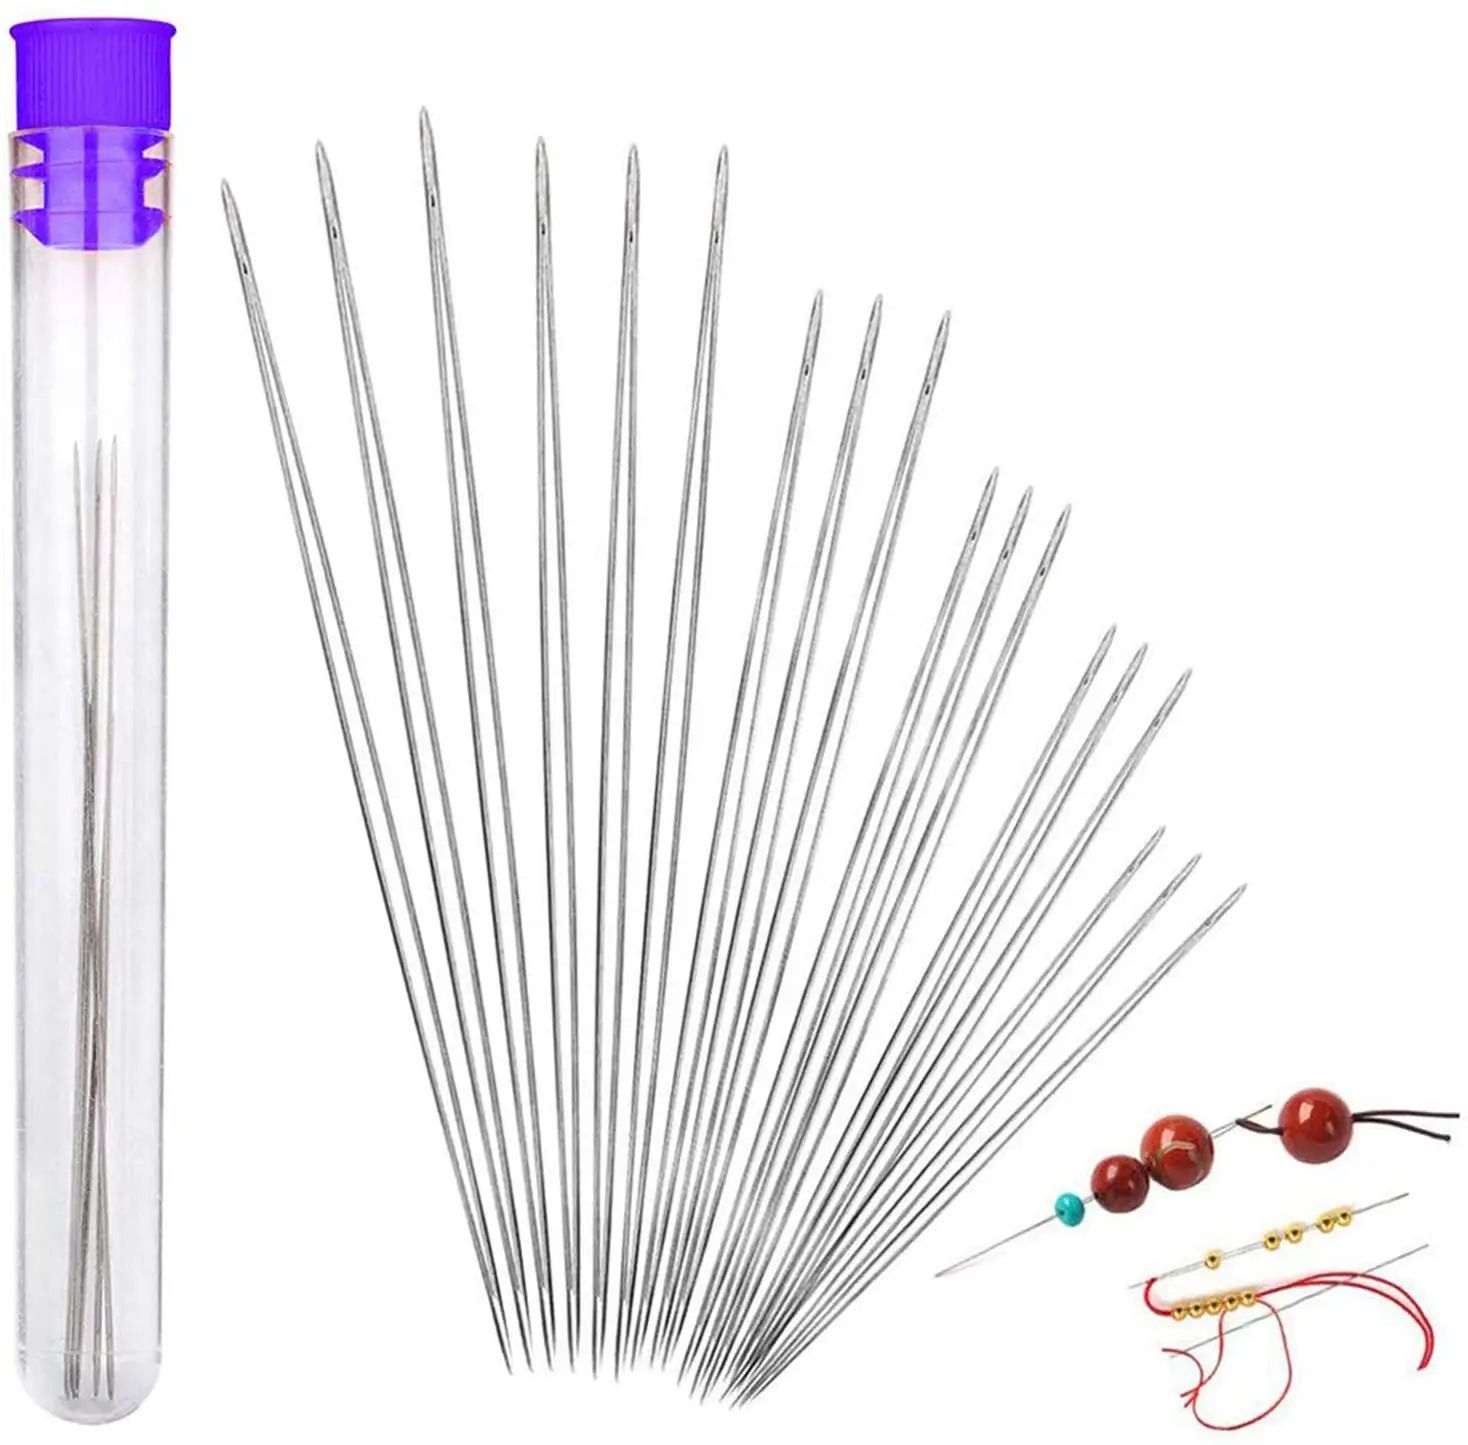 5Pc Beading Needles Seed Beads Needles Big Eye DIY Beaded Needles Collapsible Beading Pins Open Needles for Jewelry Making Tools